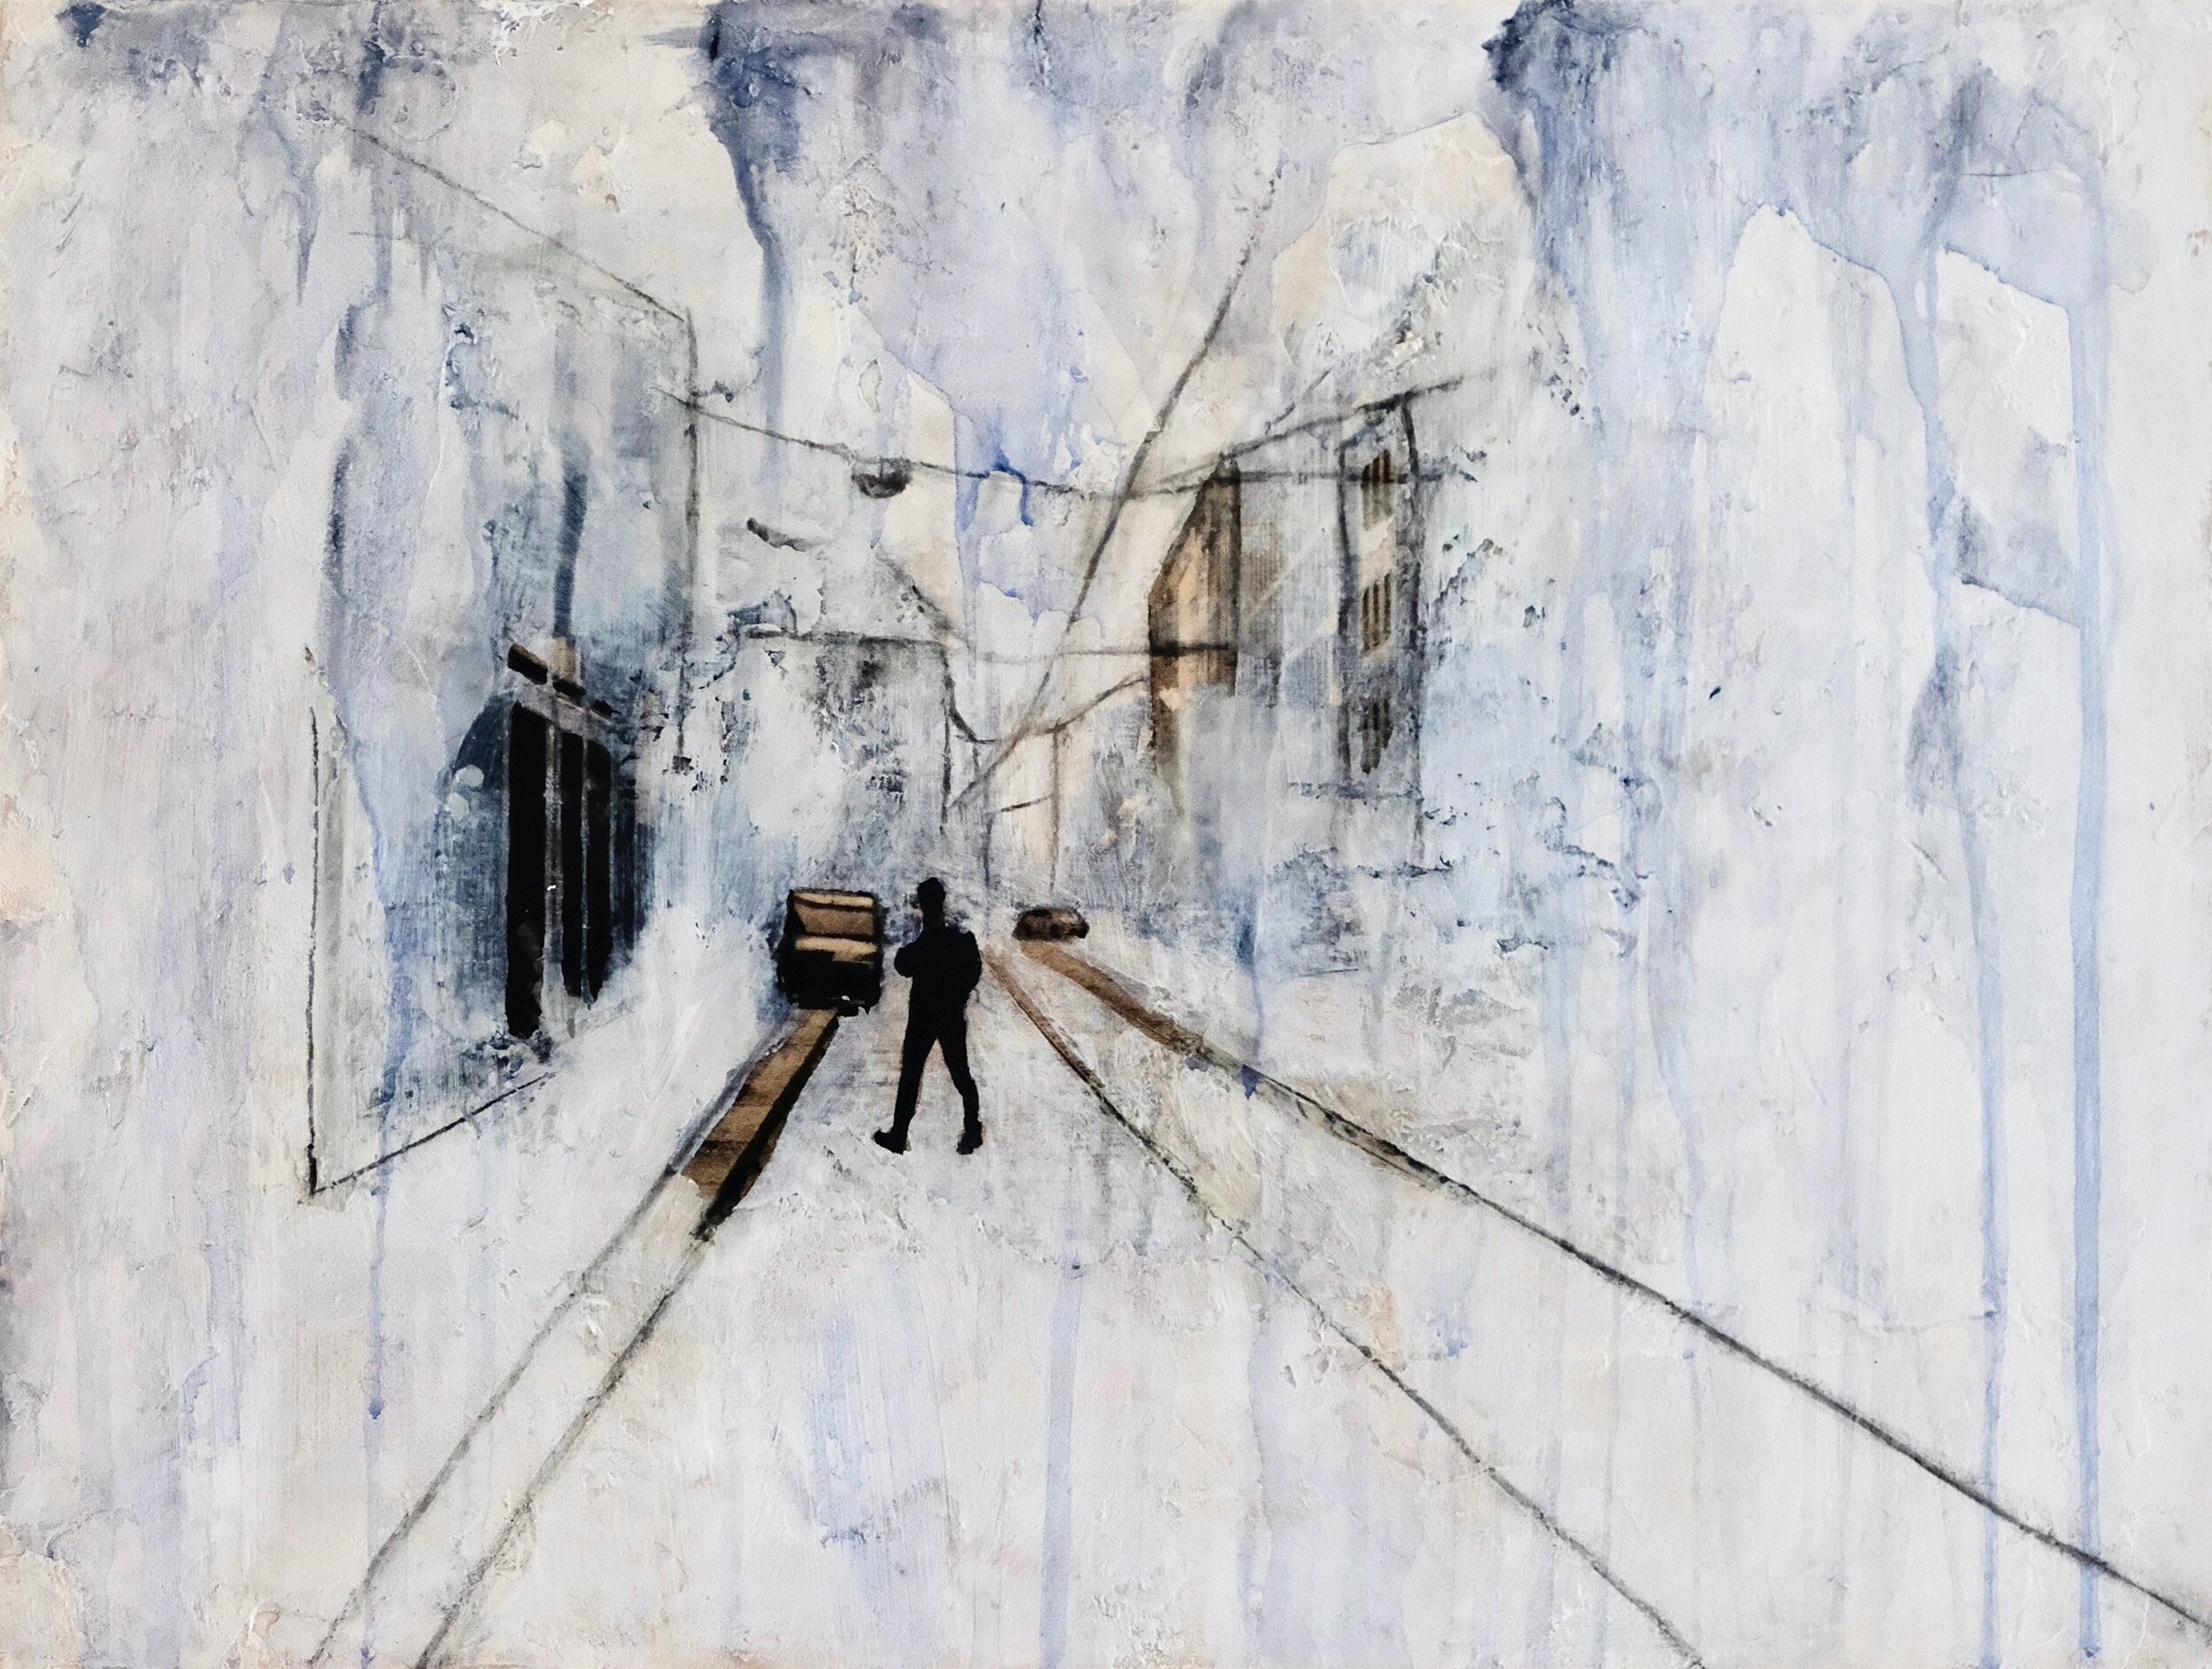   Milano IV , 2019, photo transfer, acrylic and charcoal on cradled hardboard, 12x16 inches, SOLD 